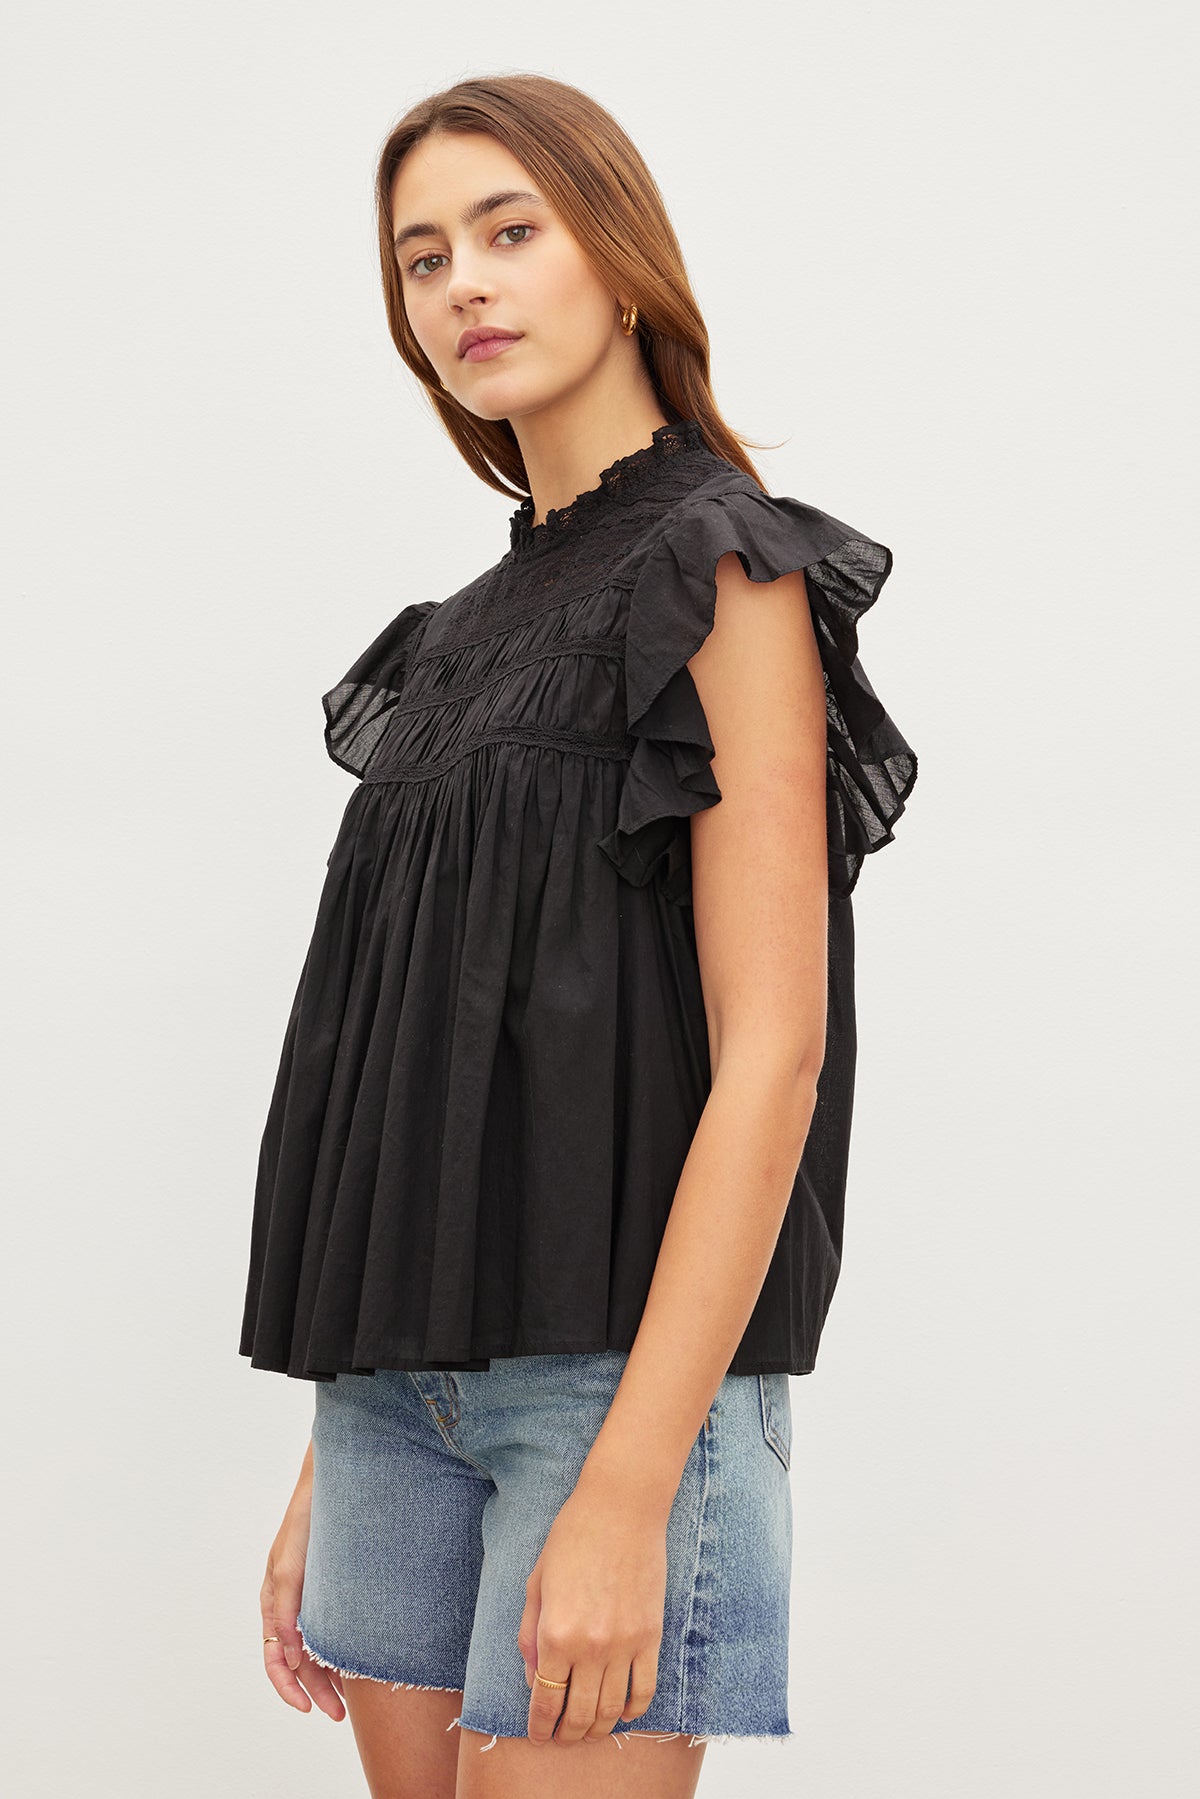 The model is wearing an INESSA COTTON LACE TOP by Velvet by Graham & Spencer with ruffled sleeves.-35967734350017